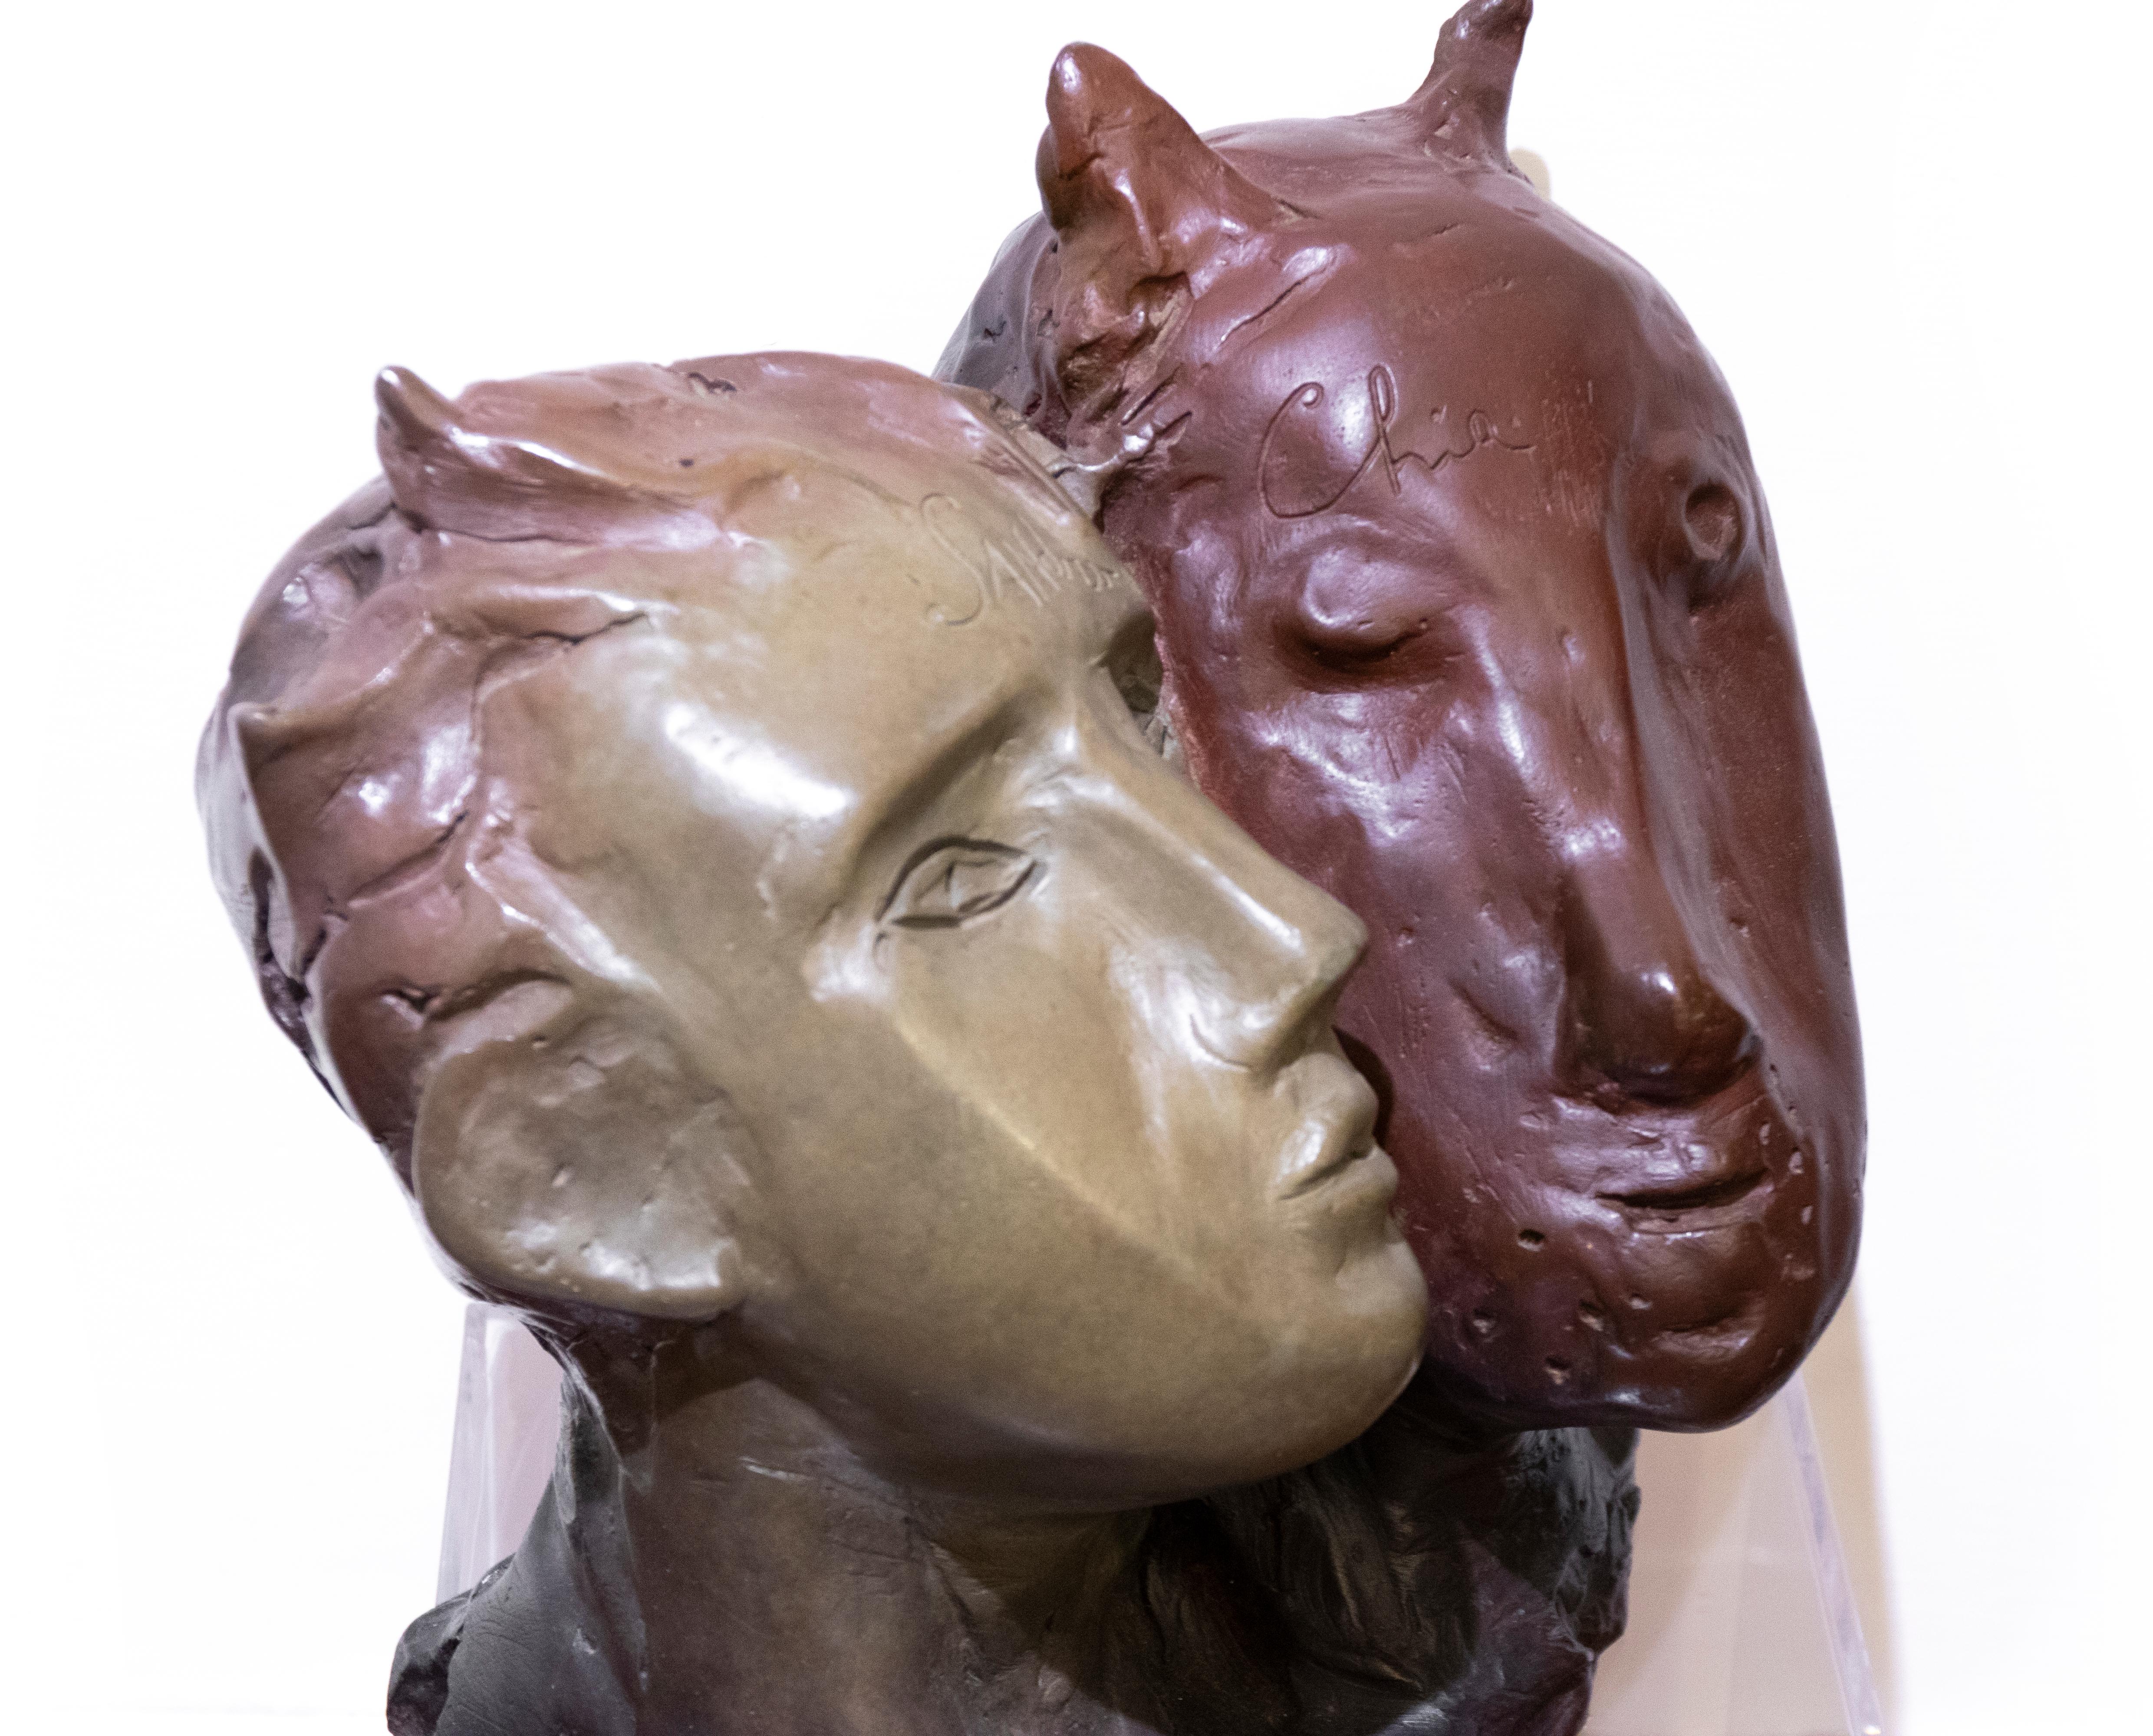 Youth and the Devil - Bronze Sculpture by Sandro Chia - 1993 1